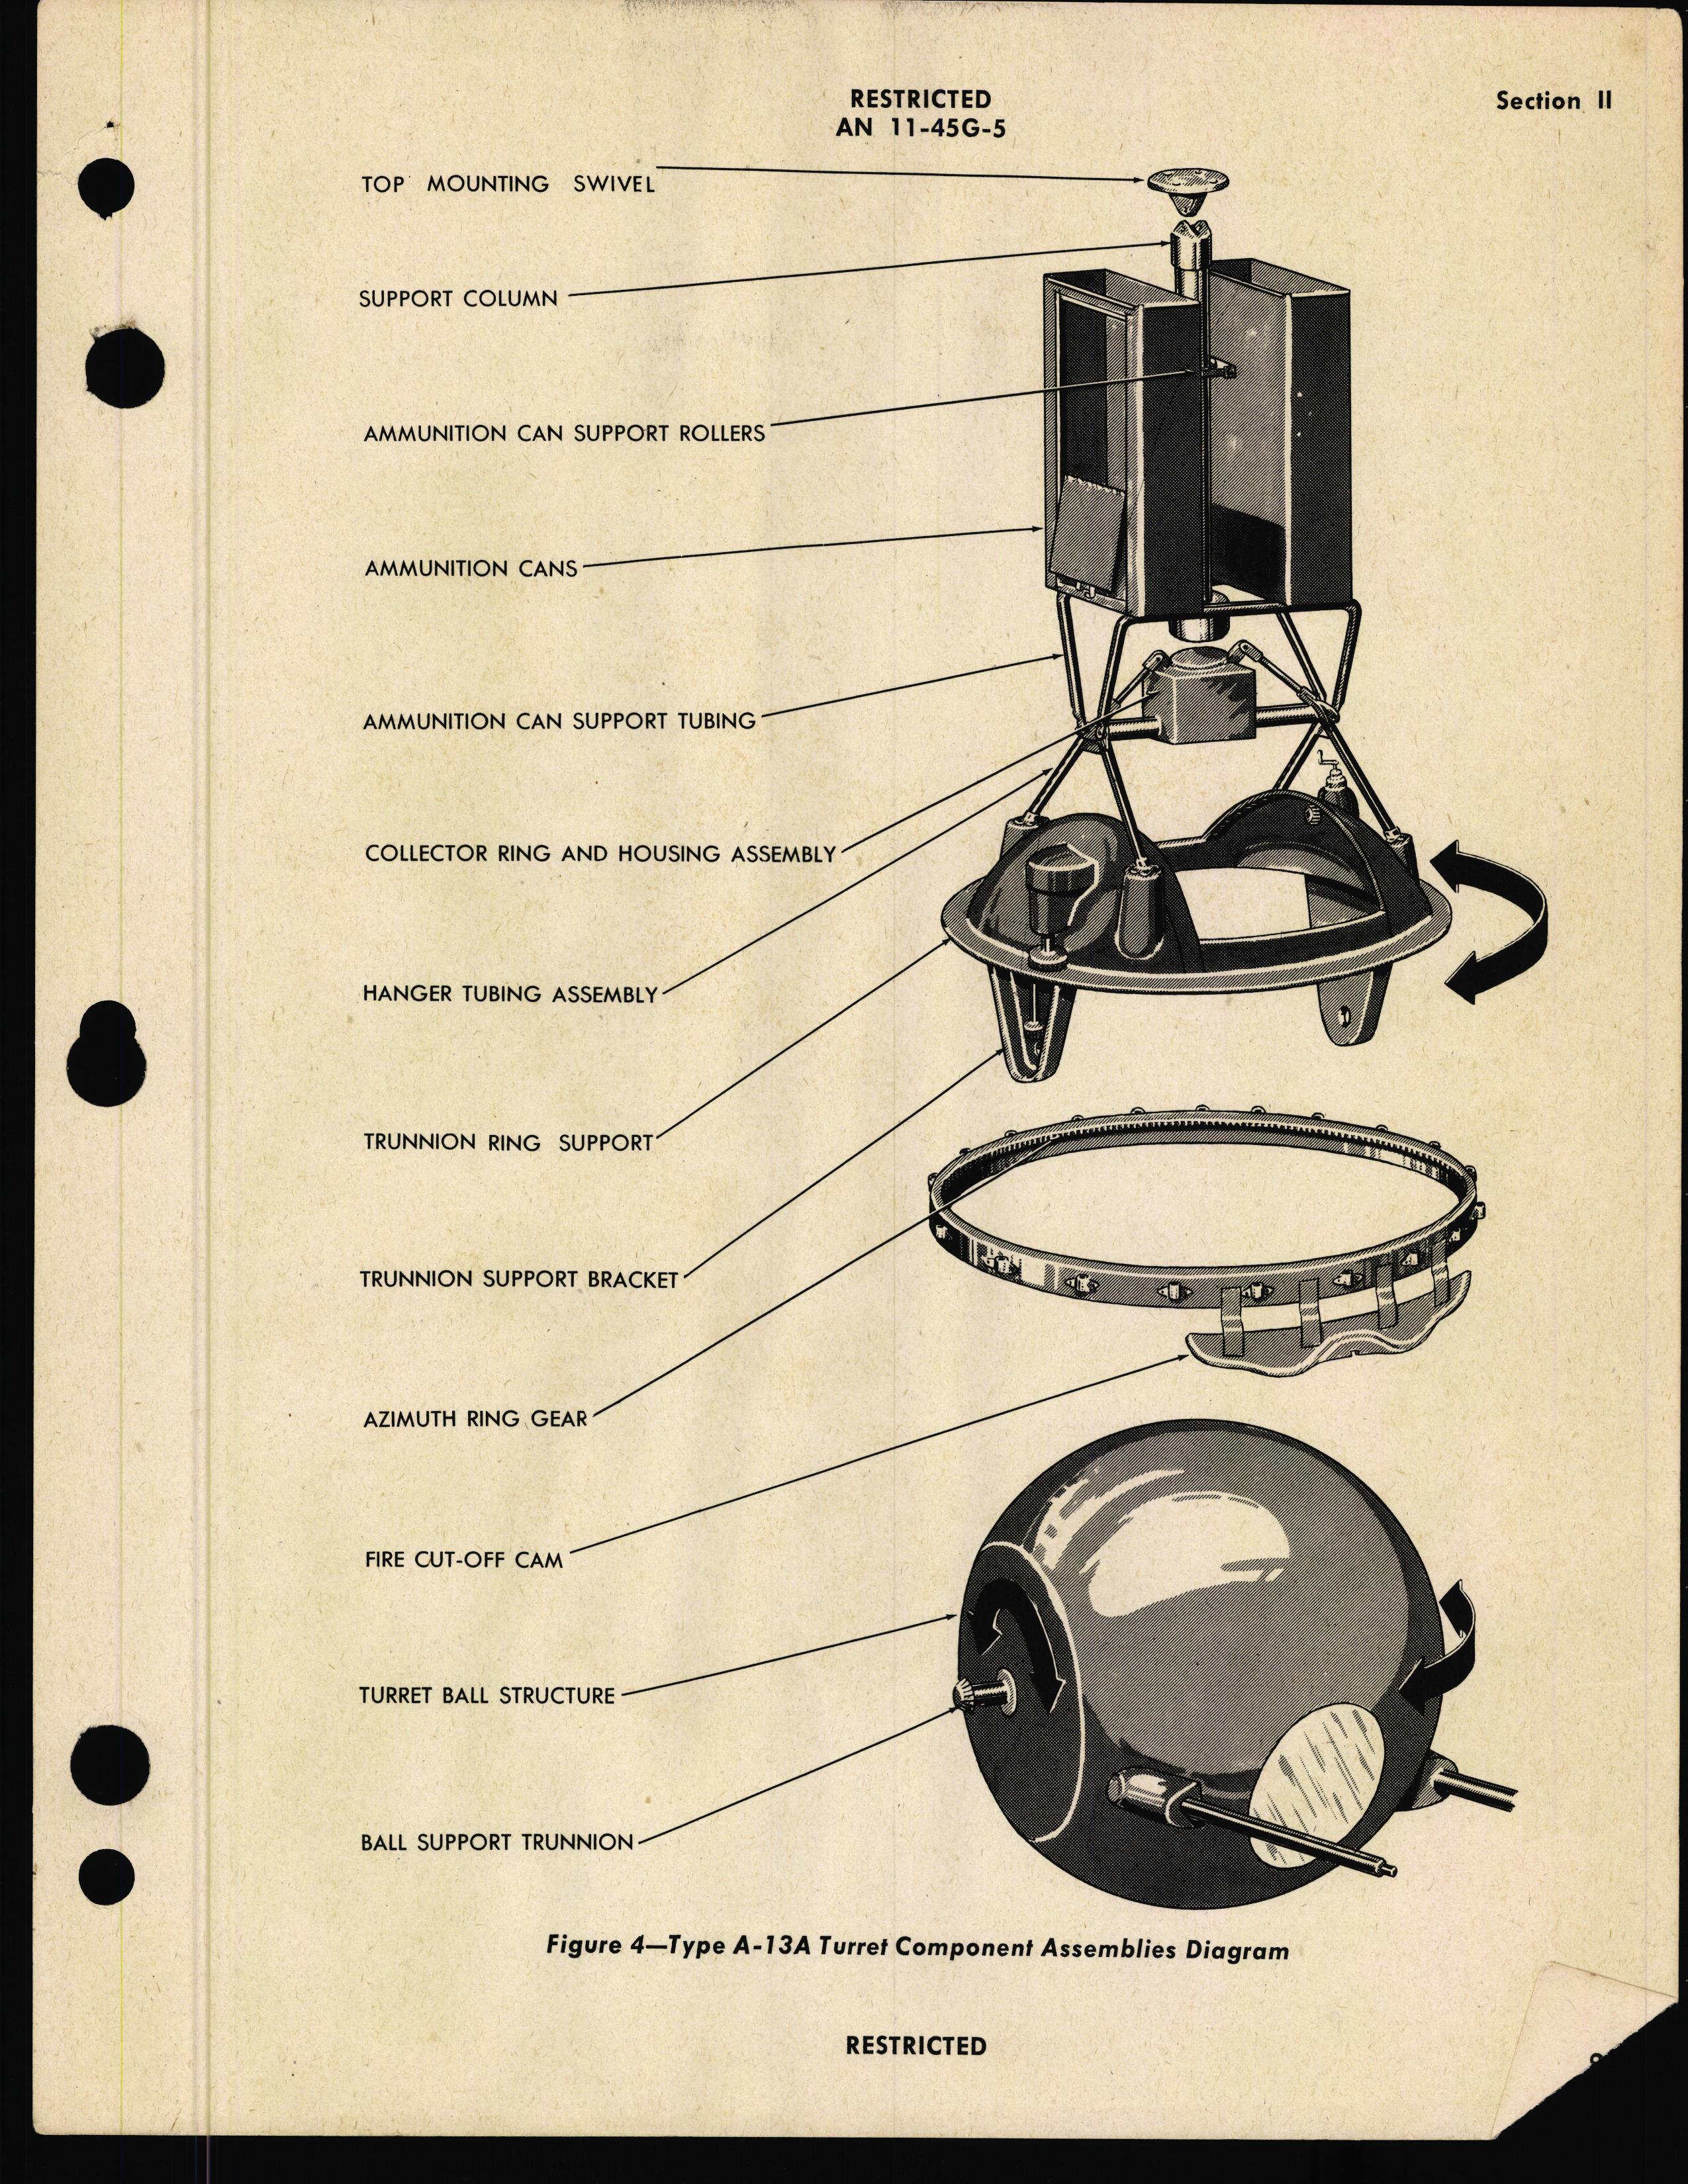 Sample page 9 from AirCorps Library document: Handbook of Instruction with Parts Catalog for Lower Ball Turrets